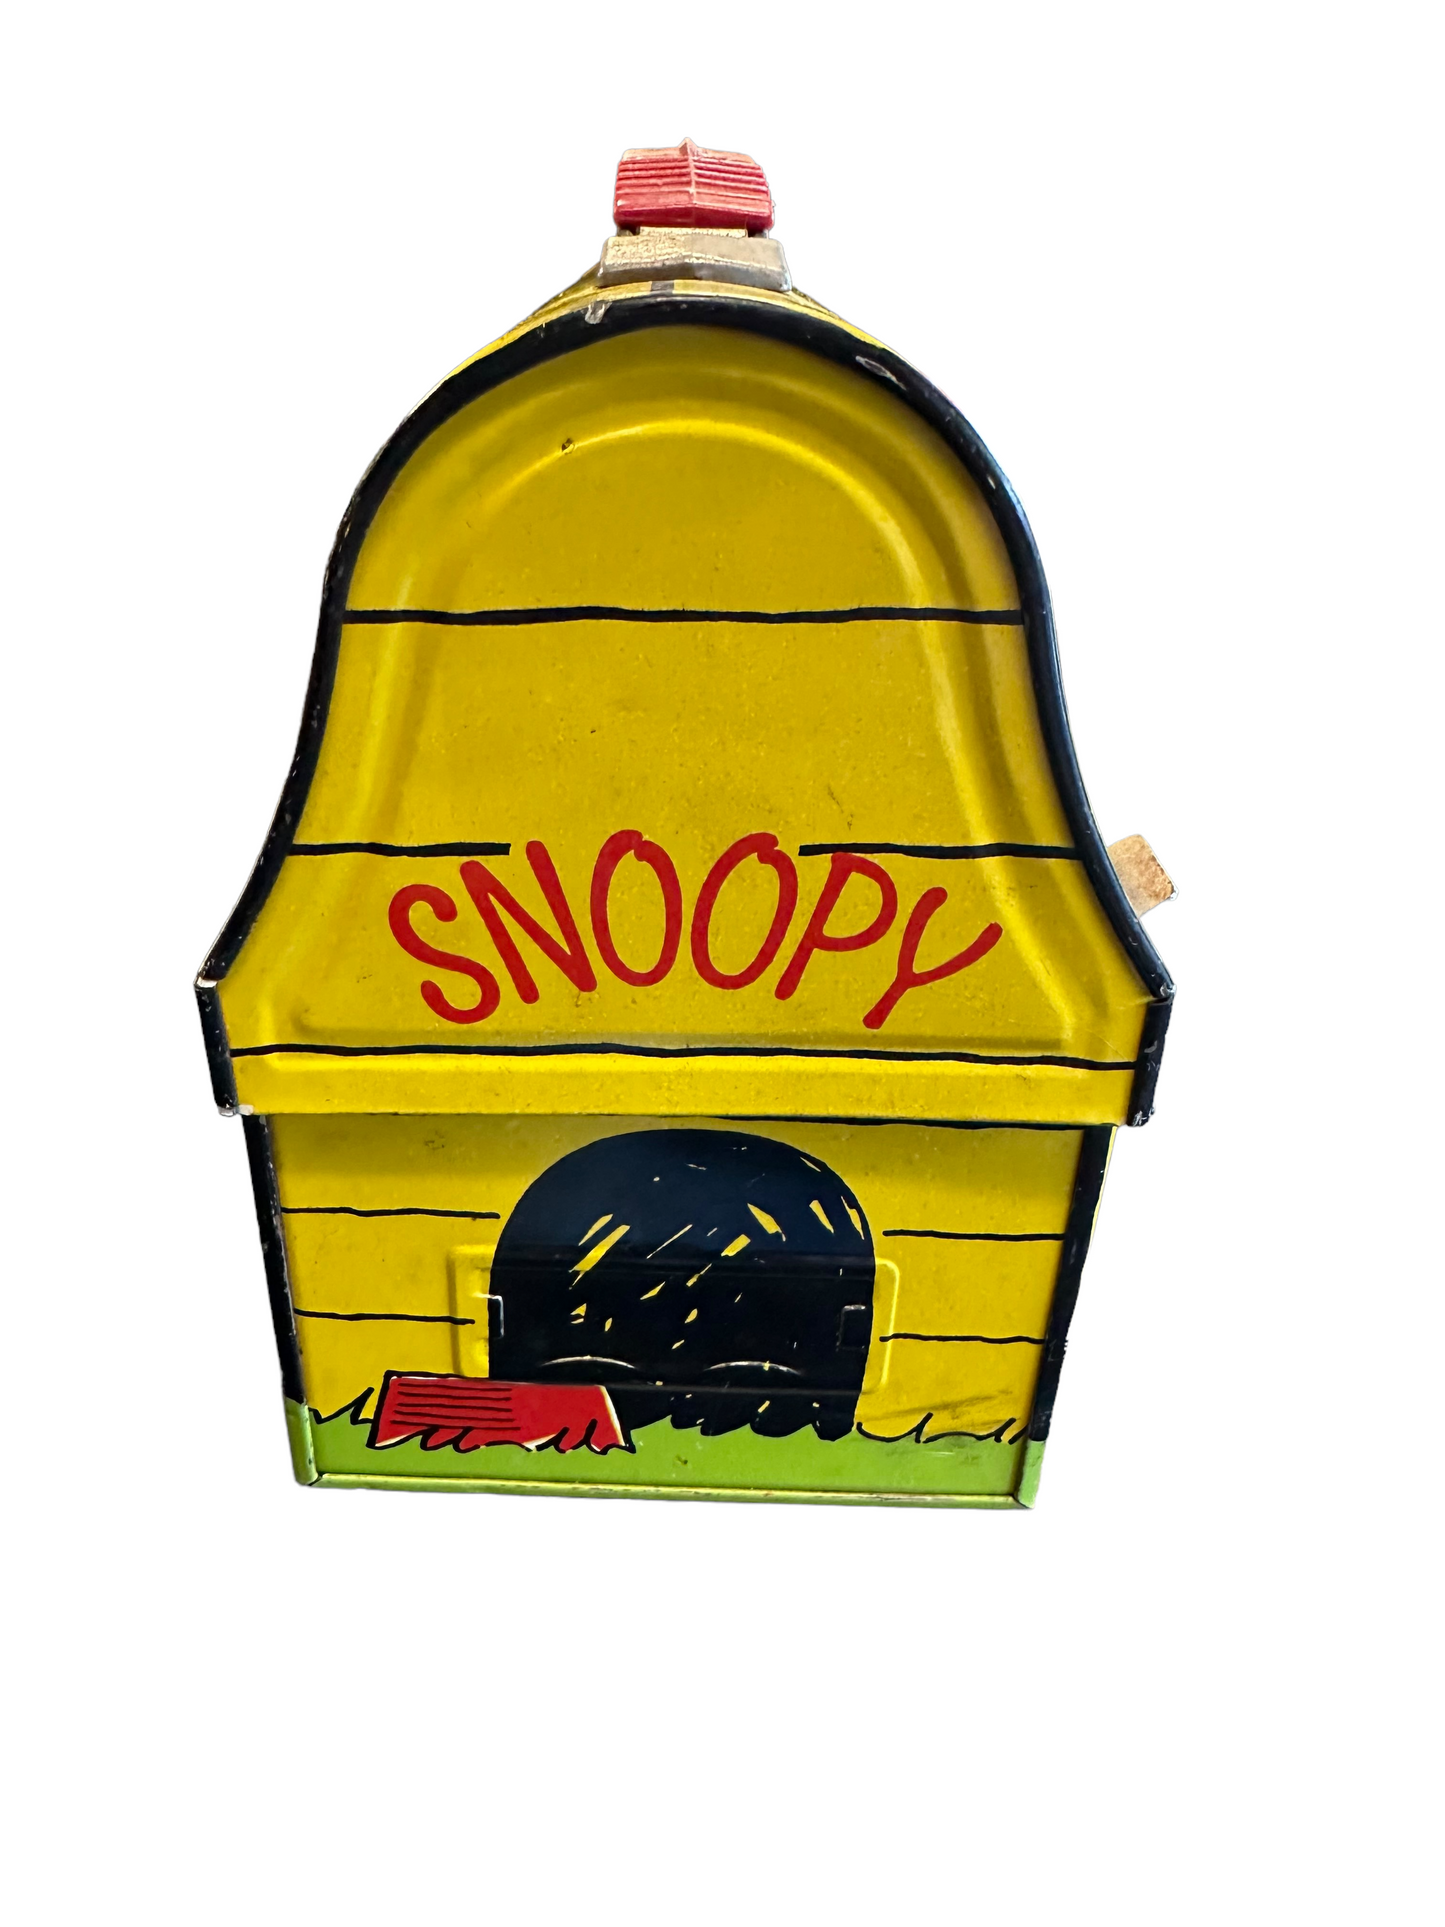 Vintage 1968 Have Lunch with Snoopy Lunch Box Tin Metal Collectible